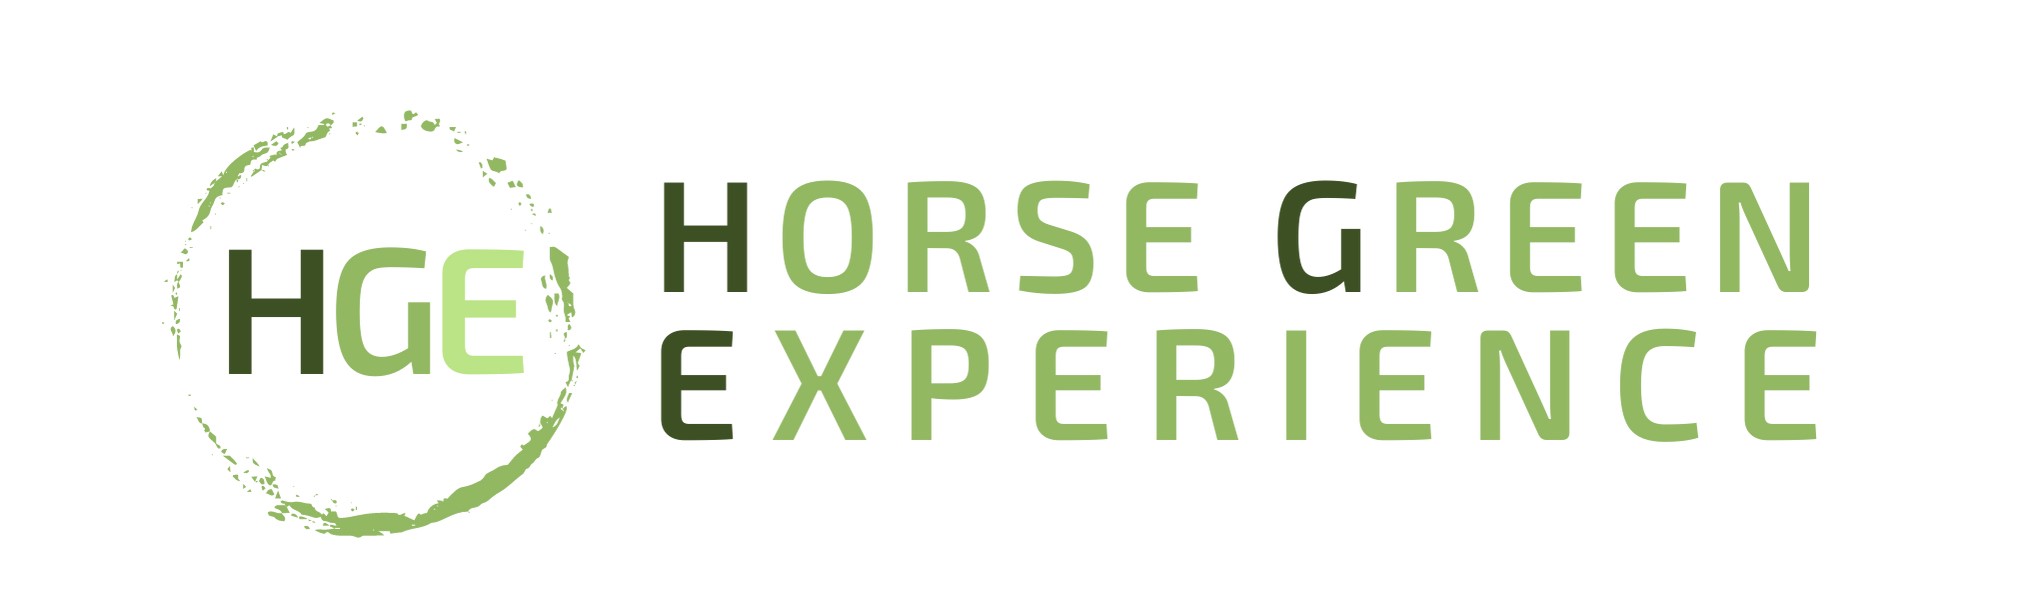 Horse Green Experience